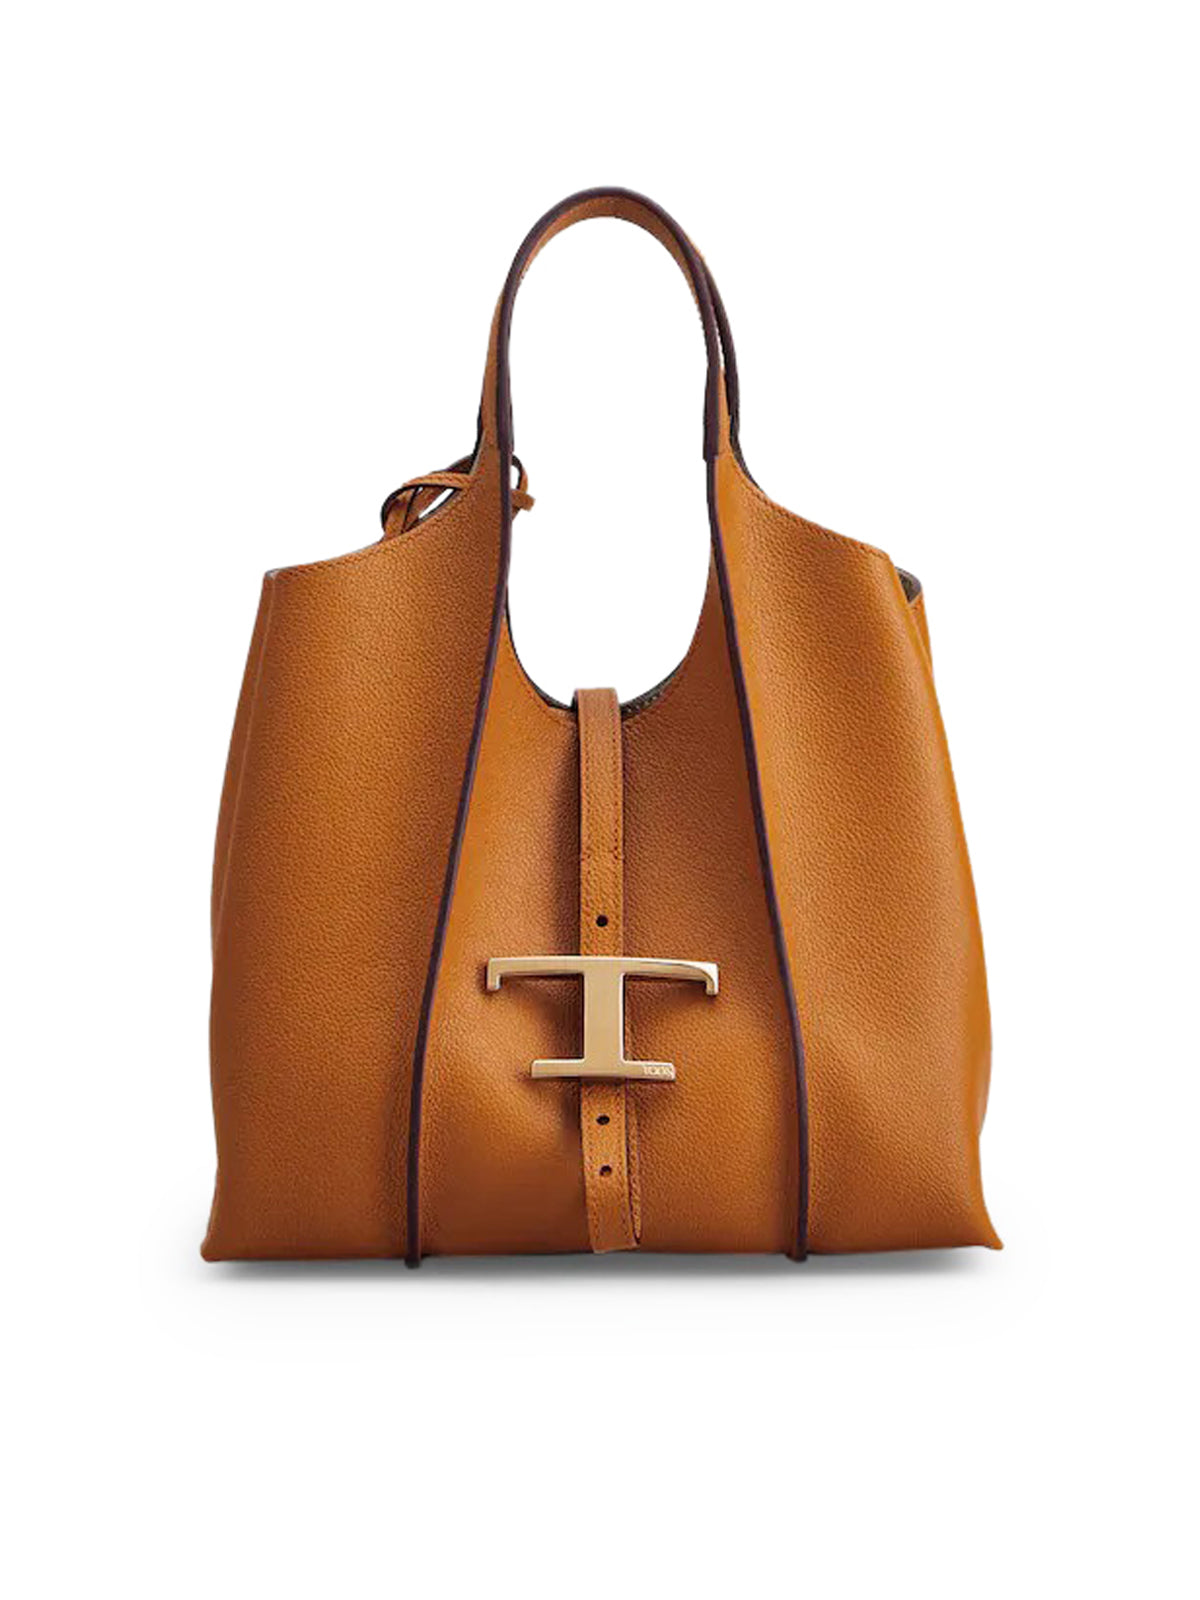 TIMELESS SHOPPING BAG IN LEATHER MINI